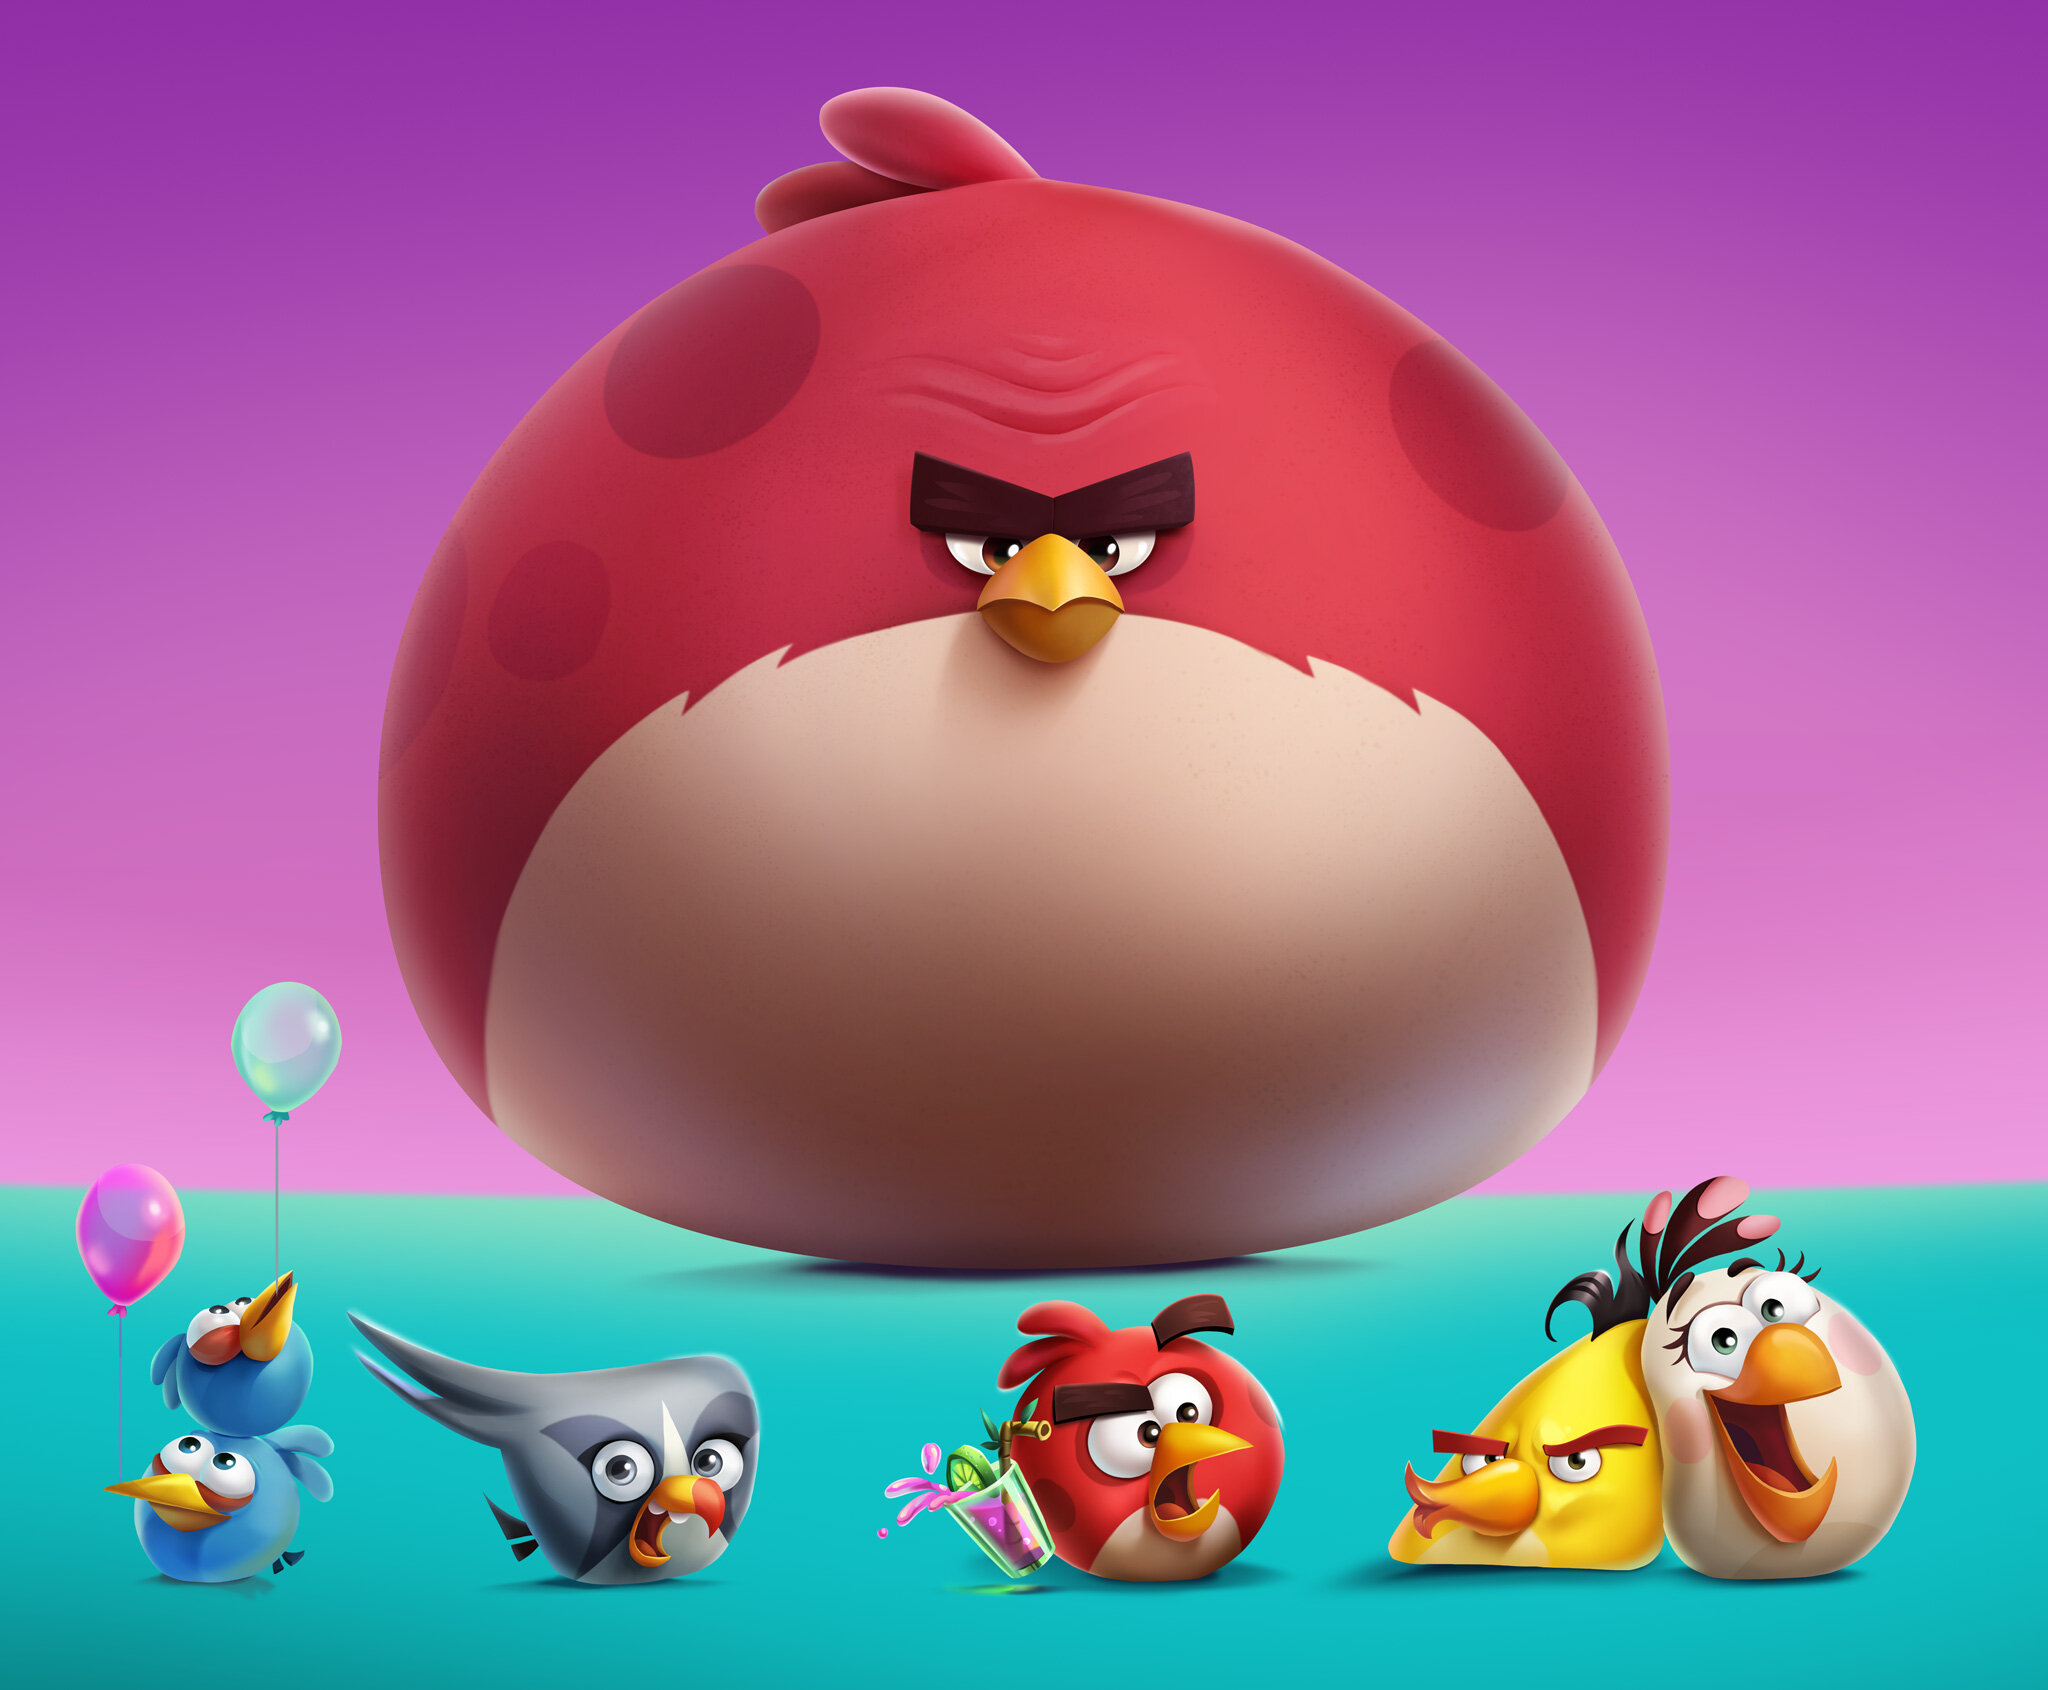 Character paint for Angry Birds 2, Rovio Entertainment